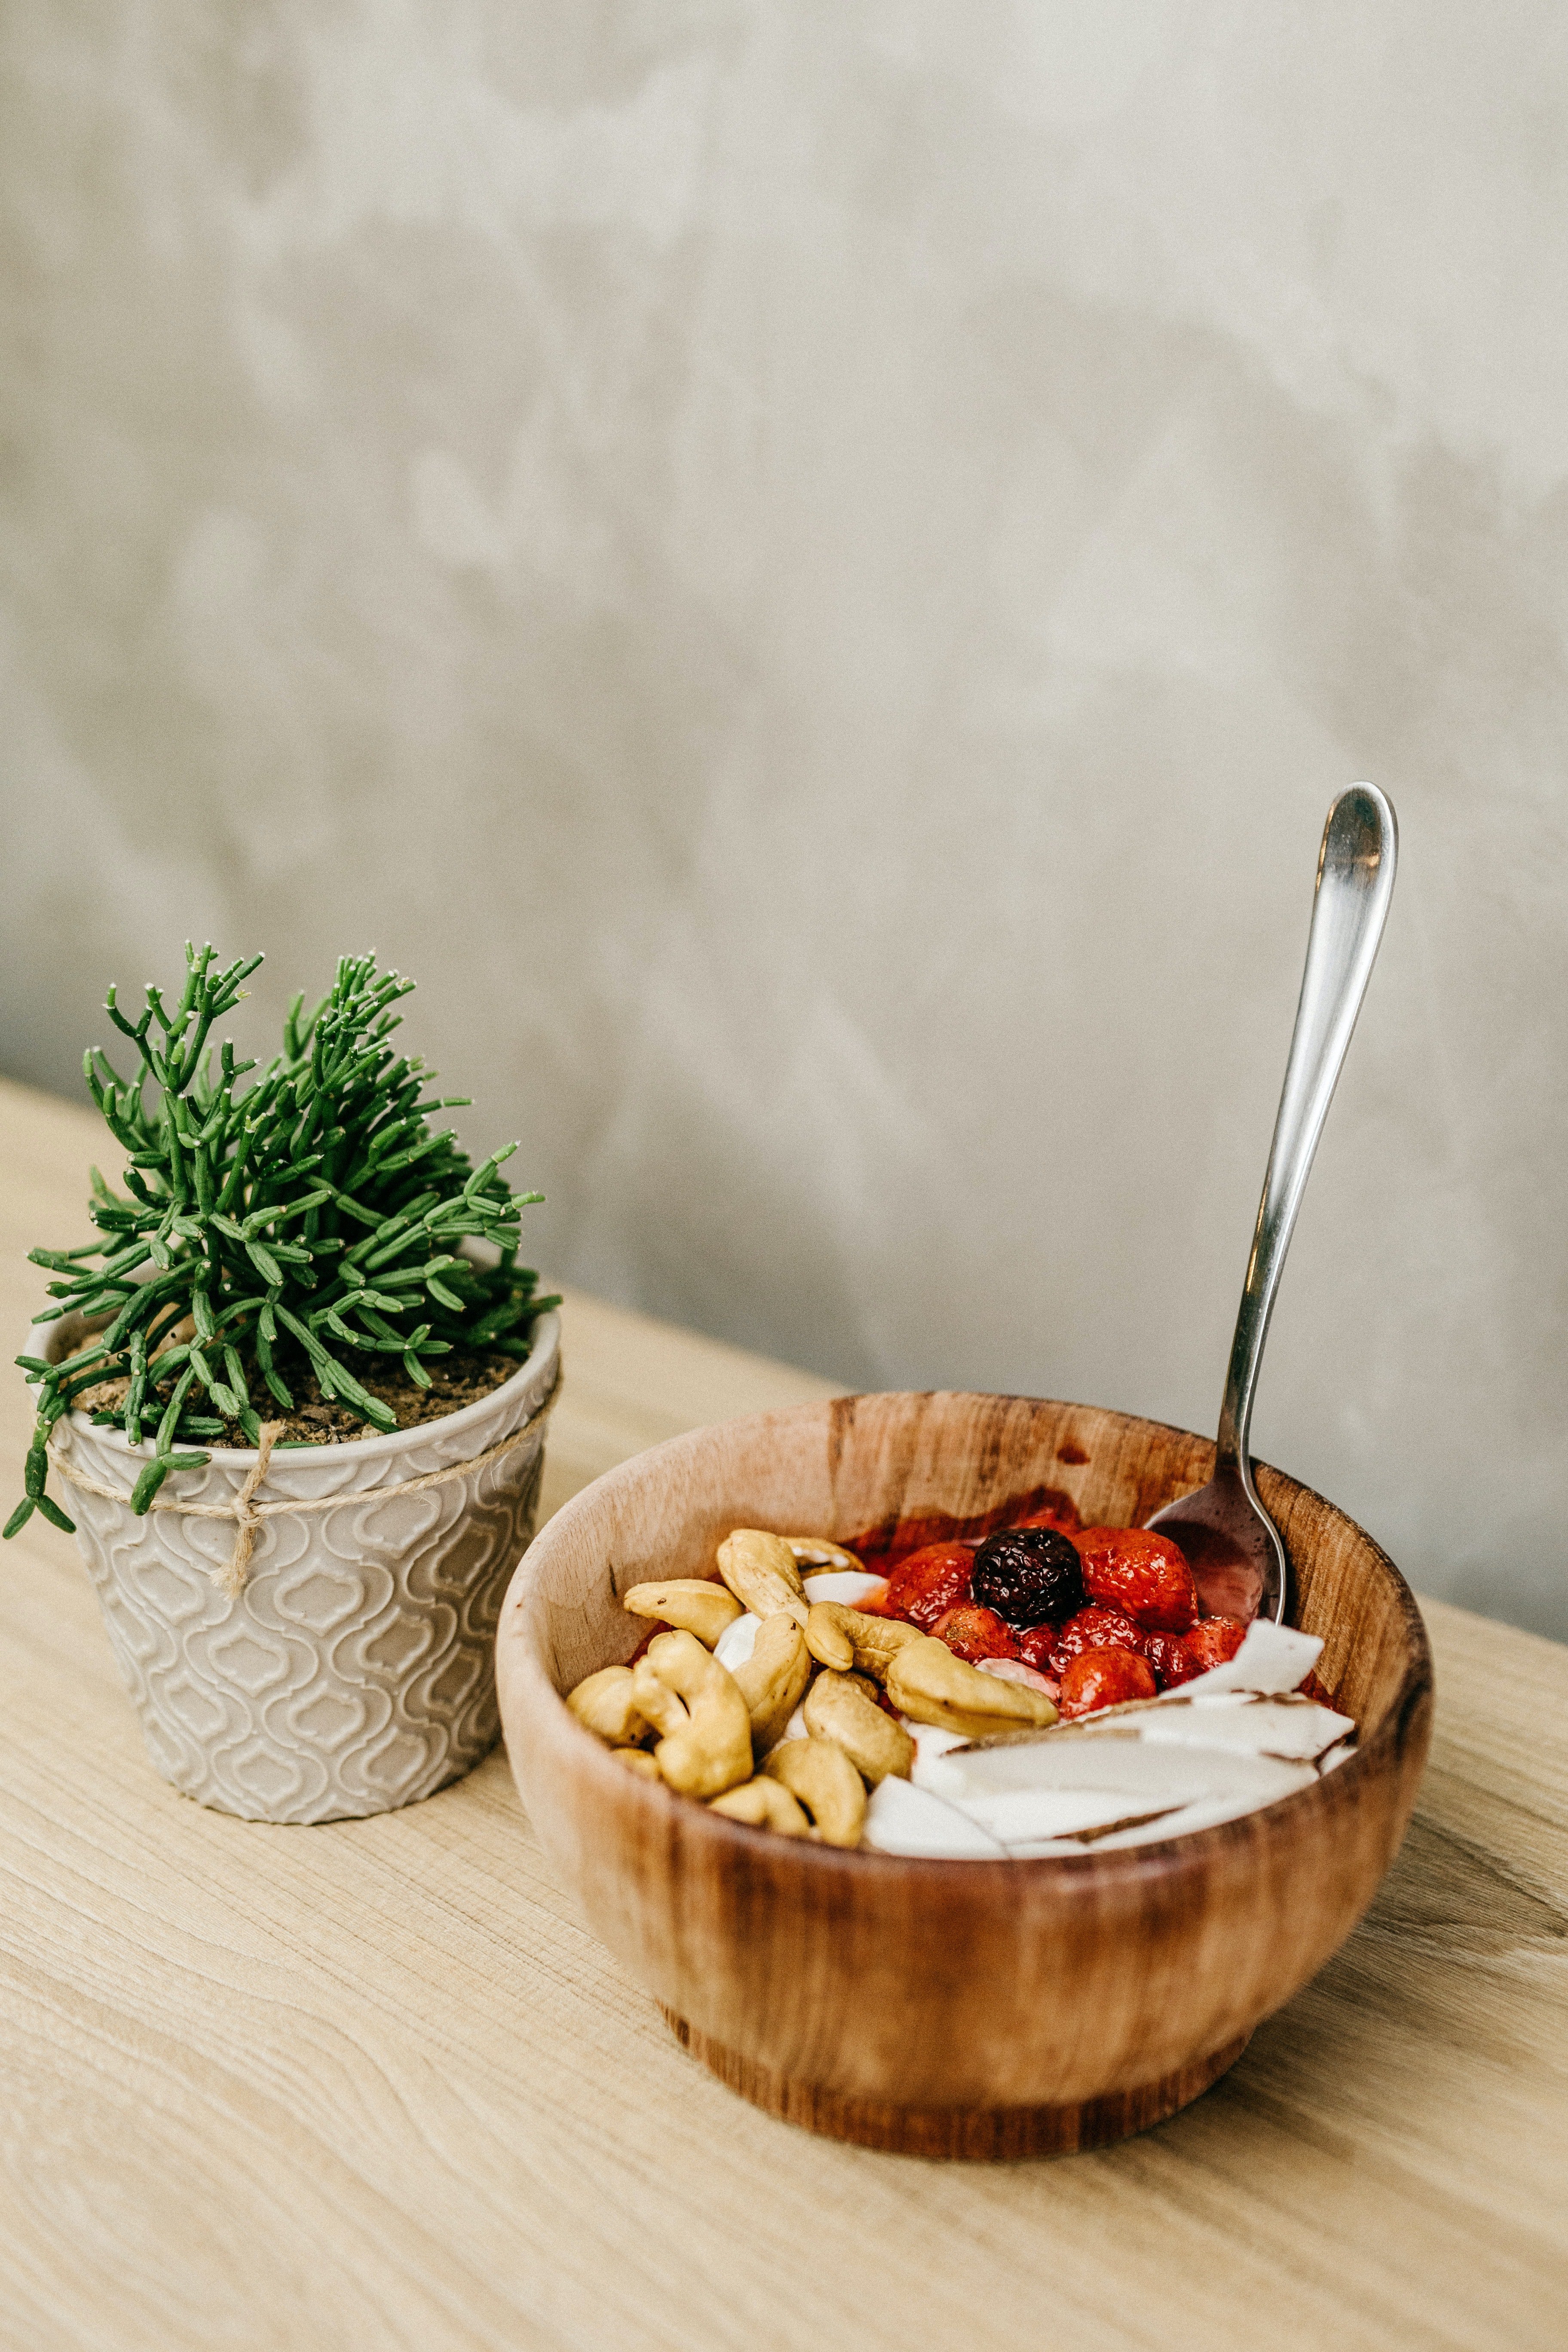 A photo of sliced berries and cashews in a wooden bowl | Source: Pexels 